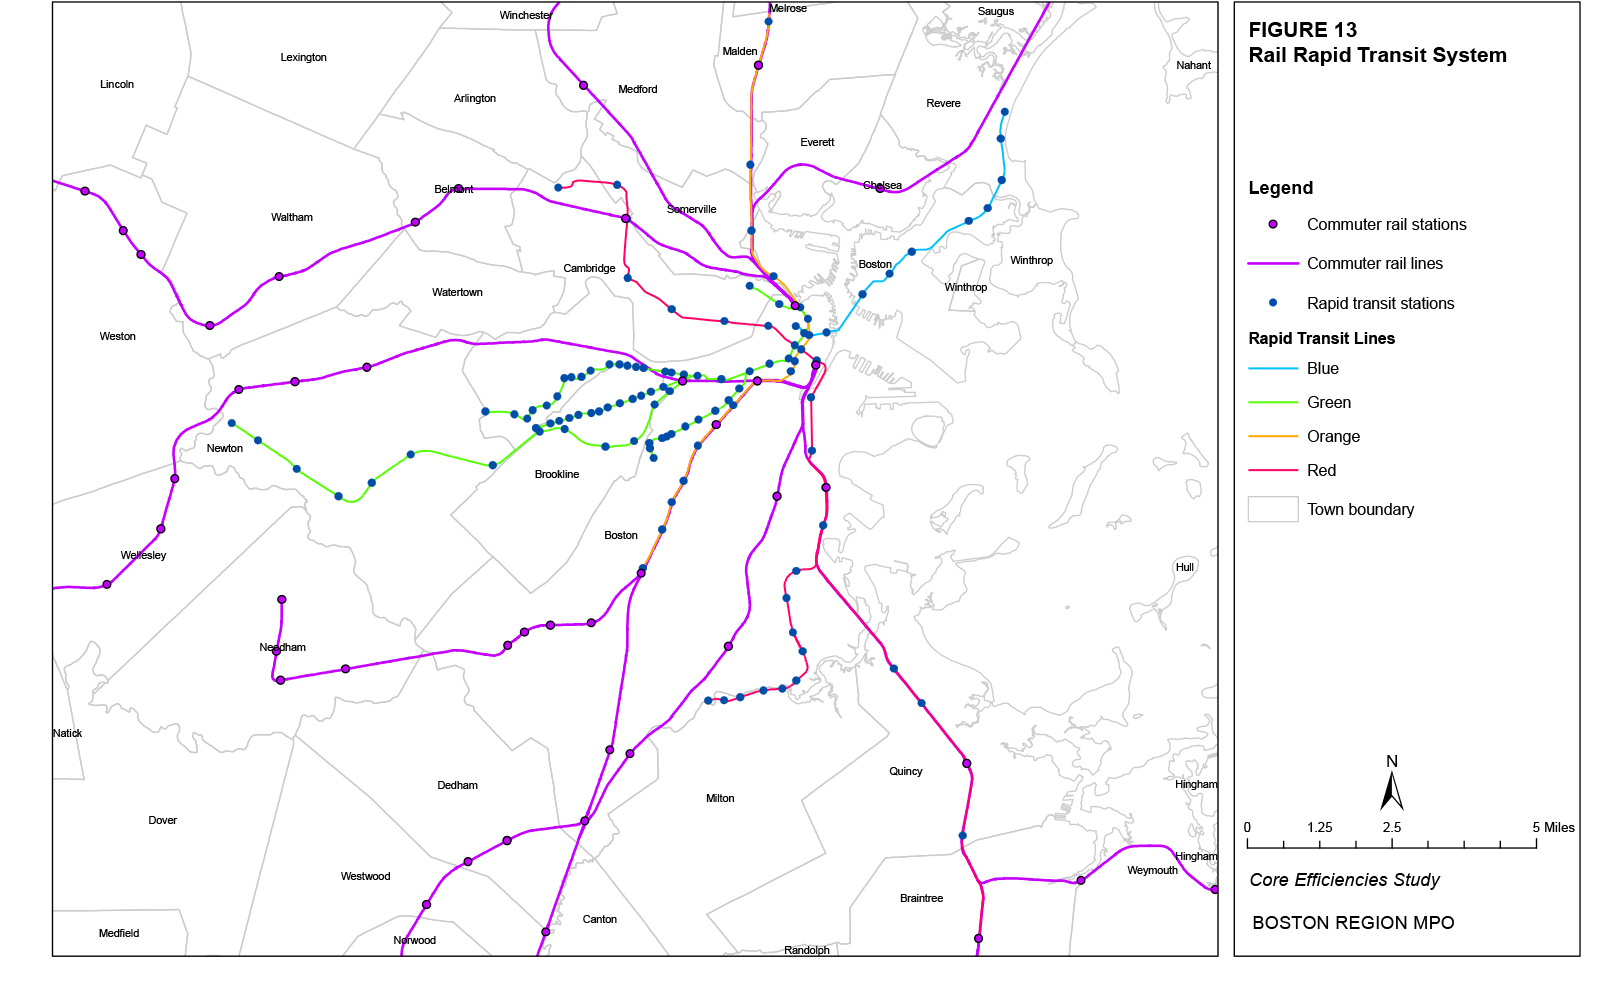 This map shows the stations and the lines in the MBTA’s rail rapid transit system.